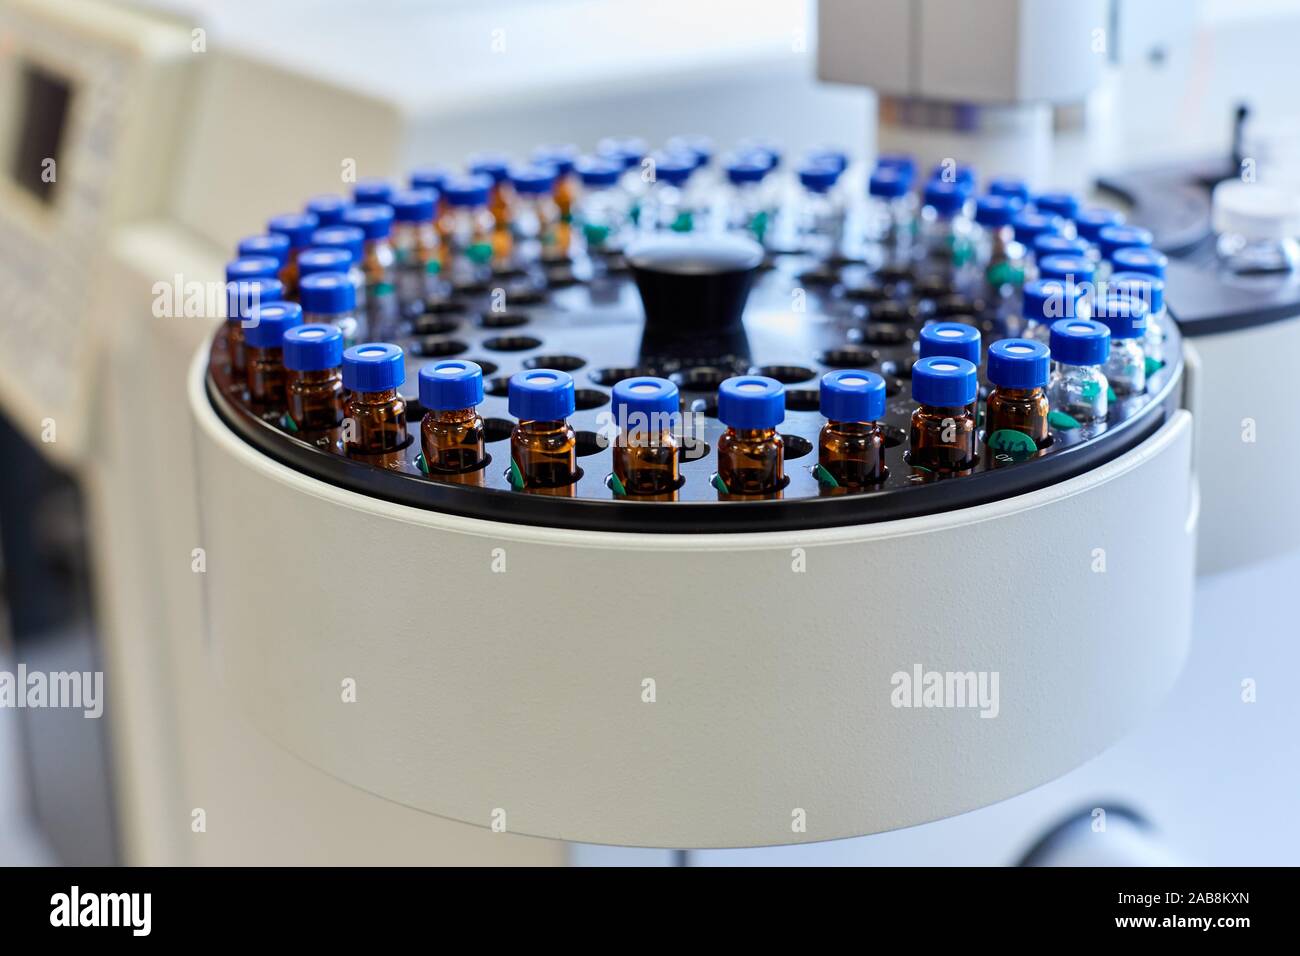 Researcher, Gas and liquid chromatograph, Biotechnology Laboratory, Food industry, Unit of Health, Technology Centre, Tecnalia Research & Innovation, Stock Photo